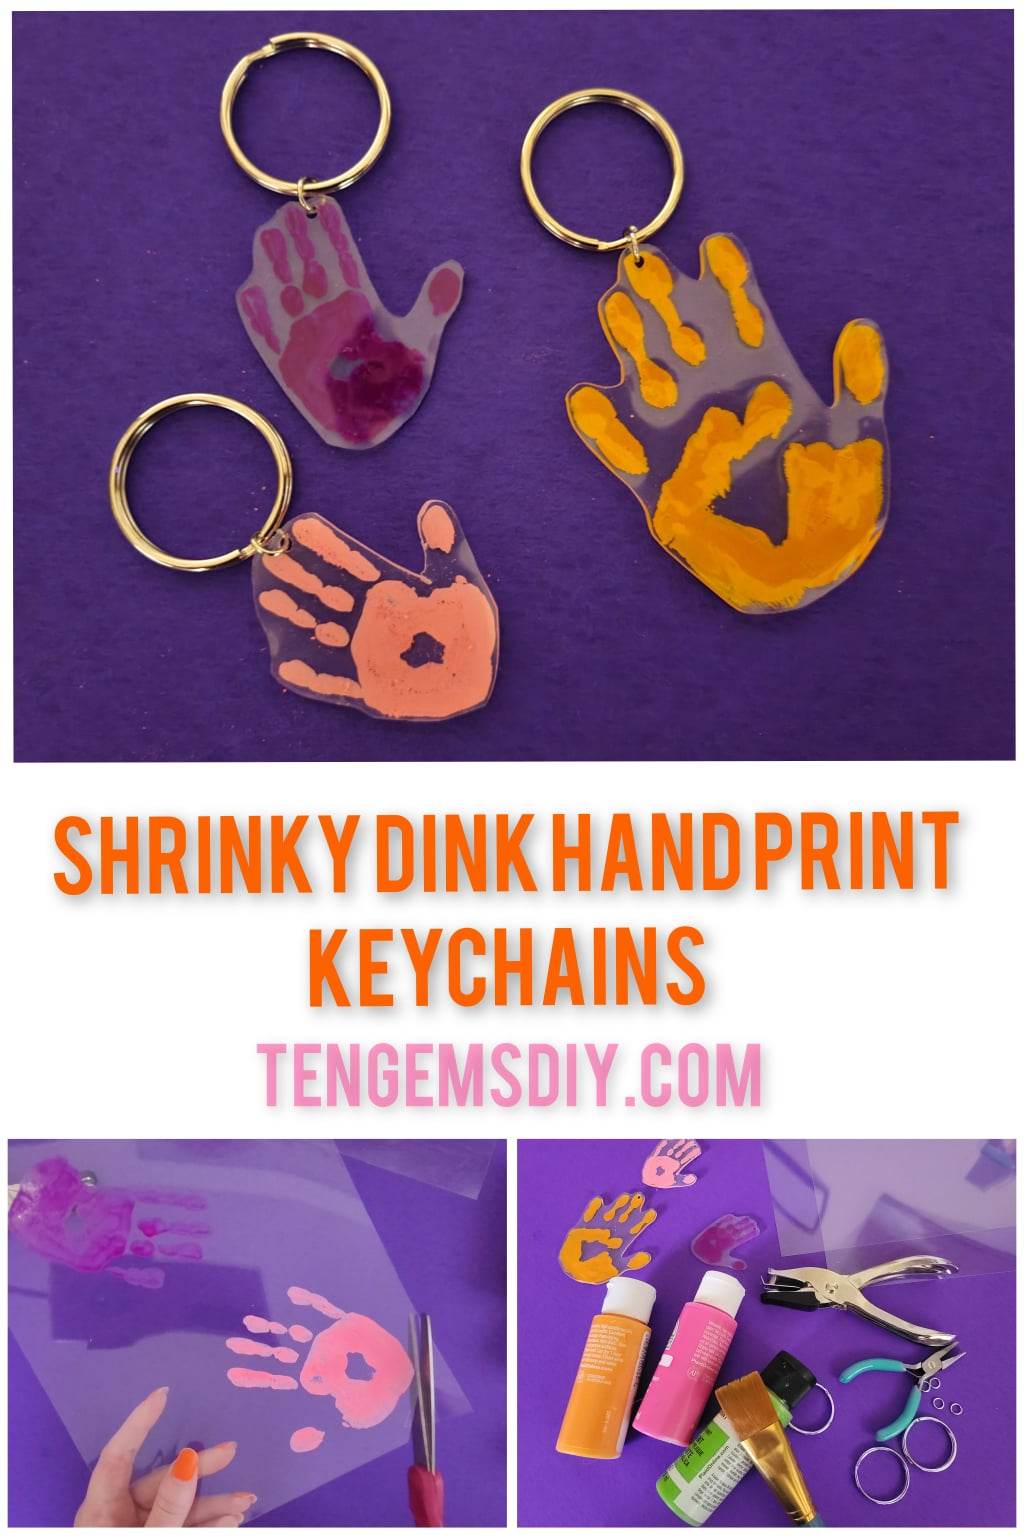 Shrinky dink crafts, shrinky dink handprints, keychain crafts, shrinky dink ideas, shrinky dink crafts, keychain ideas, keychain diy, easy keychain crafts, mothers day crafts, fathers day crafts, kids gift ideas, gifts for grandparents, gifts for mom, gifts for dad, kids handprint gift, personalized gift ideas, fun kids gifts, easy kids keychains, how do you make a shrinky dink keychain, shrink plastic, easy crafts to make and sell, trending crafts and diys, 90s crafts, art at home, rainy day crafts,